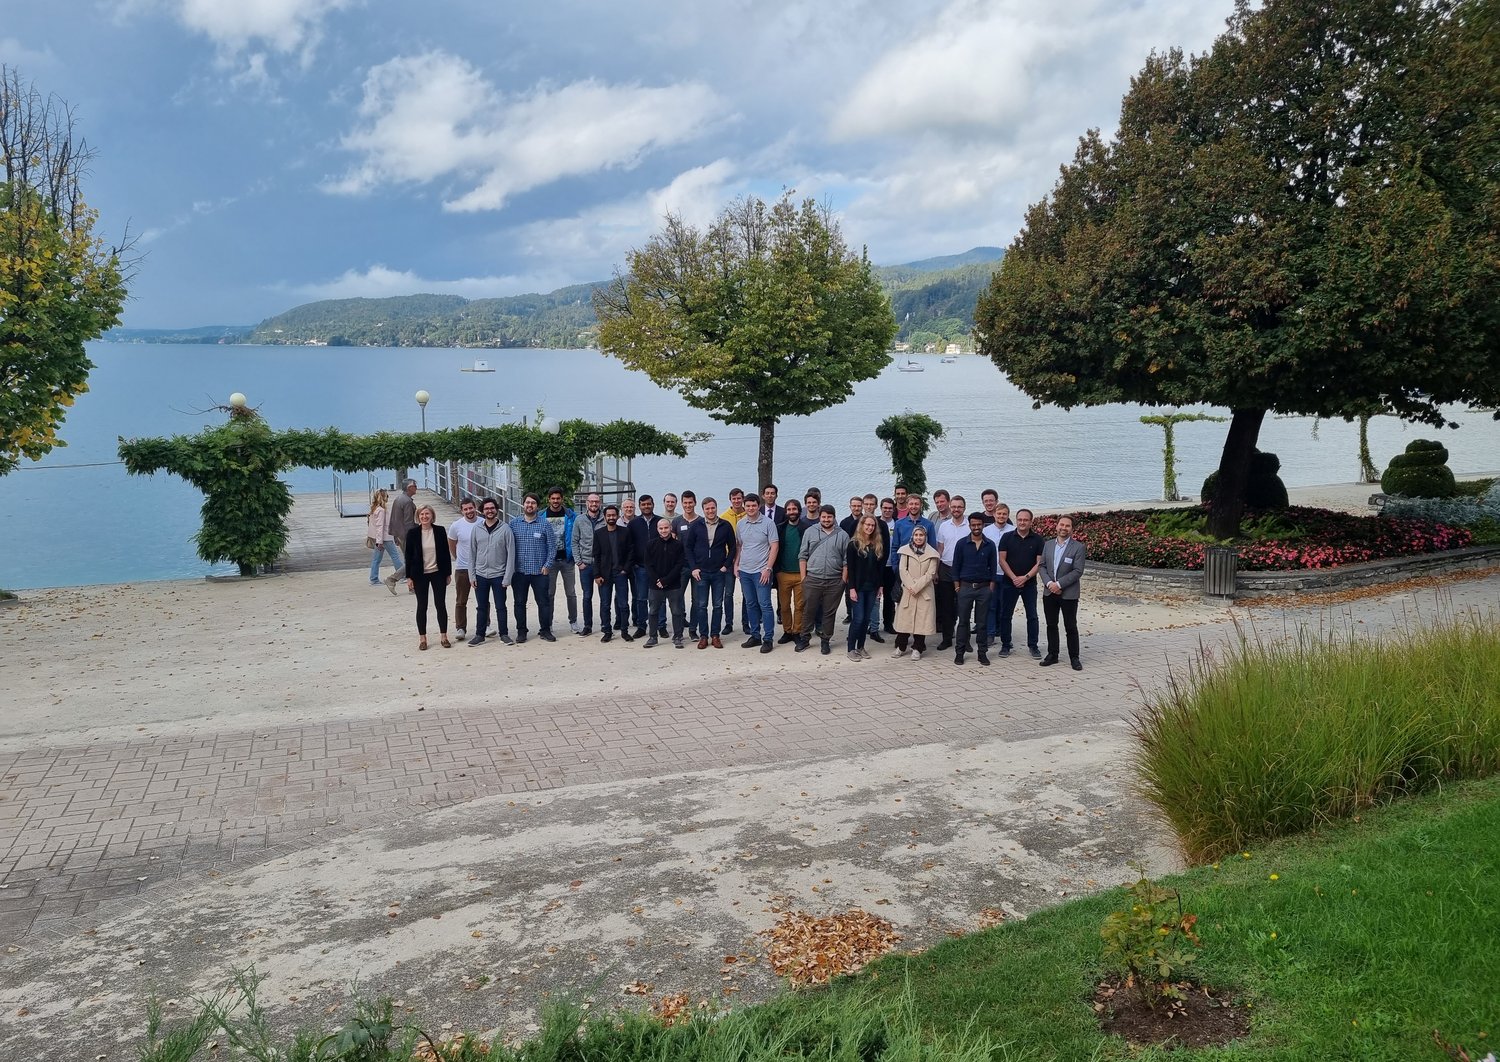 group picture of about 30 people in front of lake Wörthersee on a sunny day